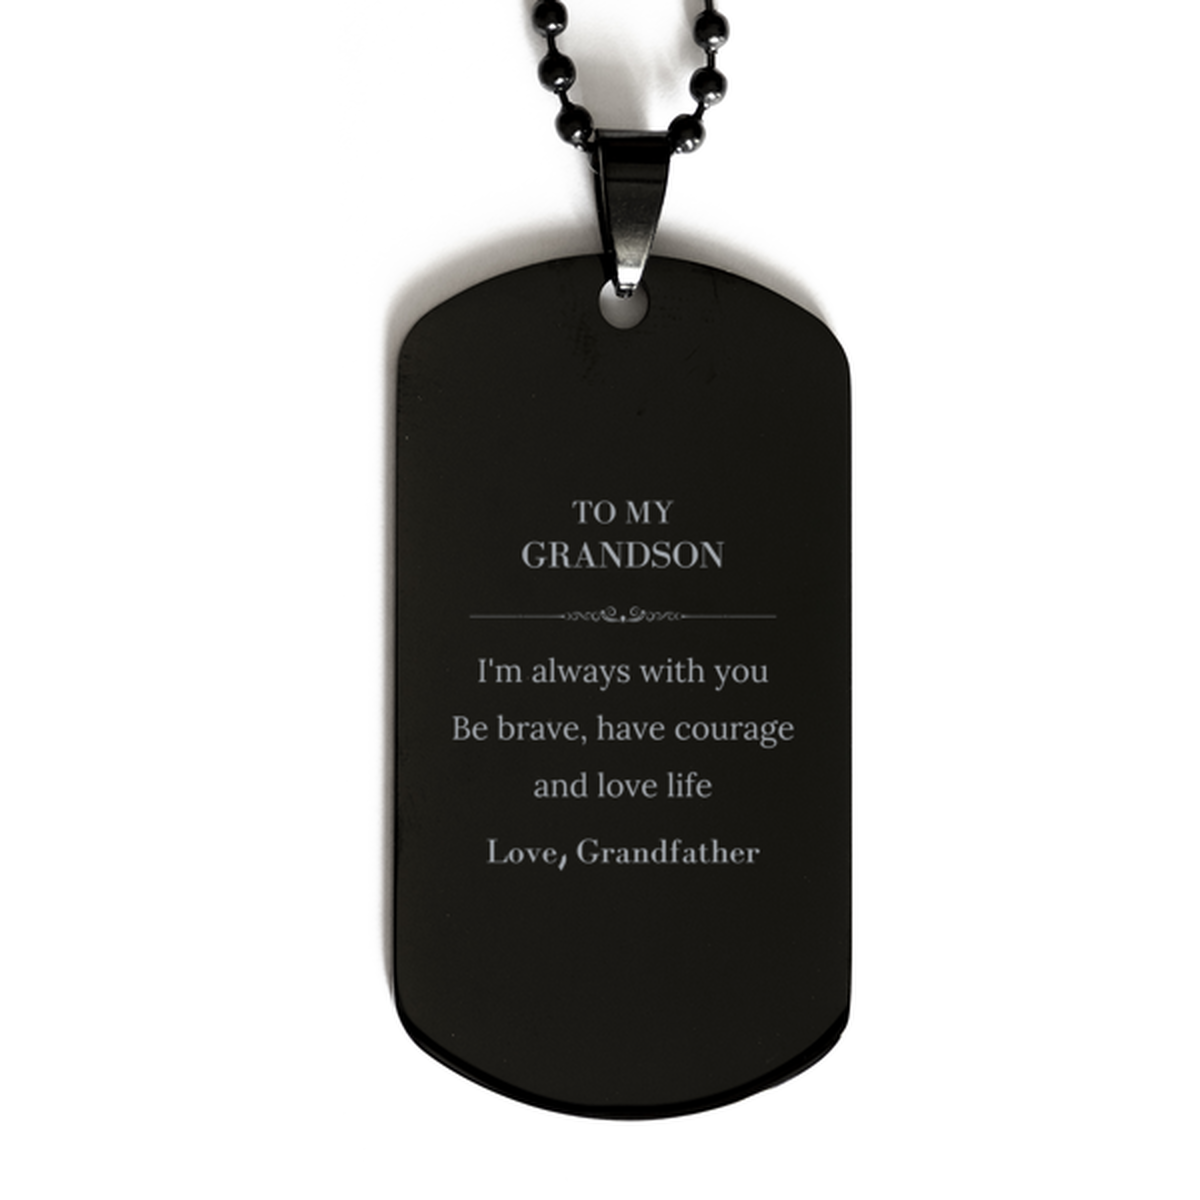 To My Grandson Gifts from Grandfather, Unique Black Dog Tag Inspirational Christmas Birthday Graduation Gifts for Grandson I'm always with you. Be brave, have courage and love life. Love, Grandfather